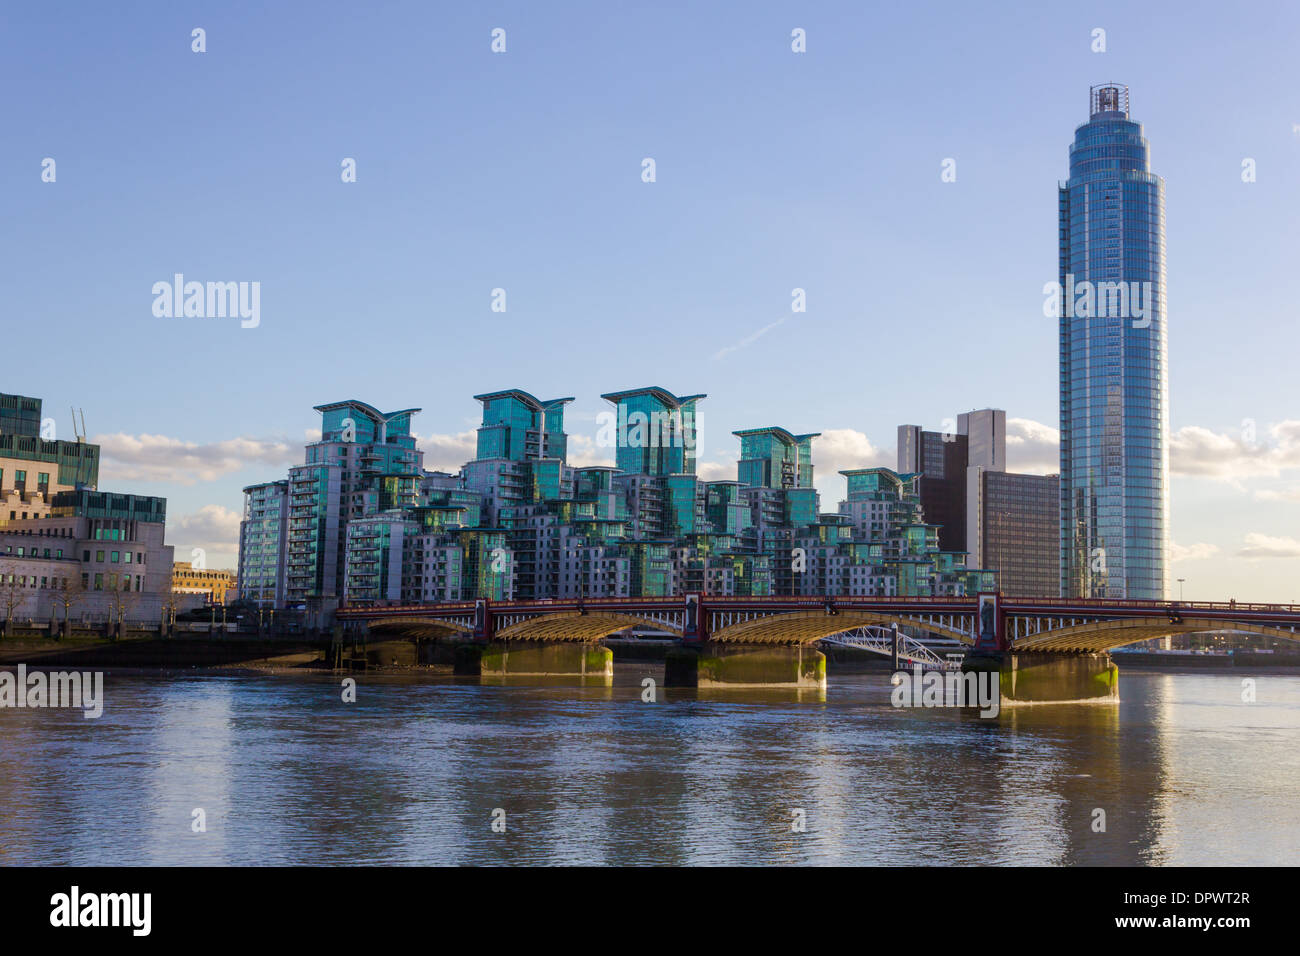 London, UK - 11th January  2014: The Hamilton House residential complex in London in Vauxhall Bridge Stock Photo